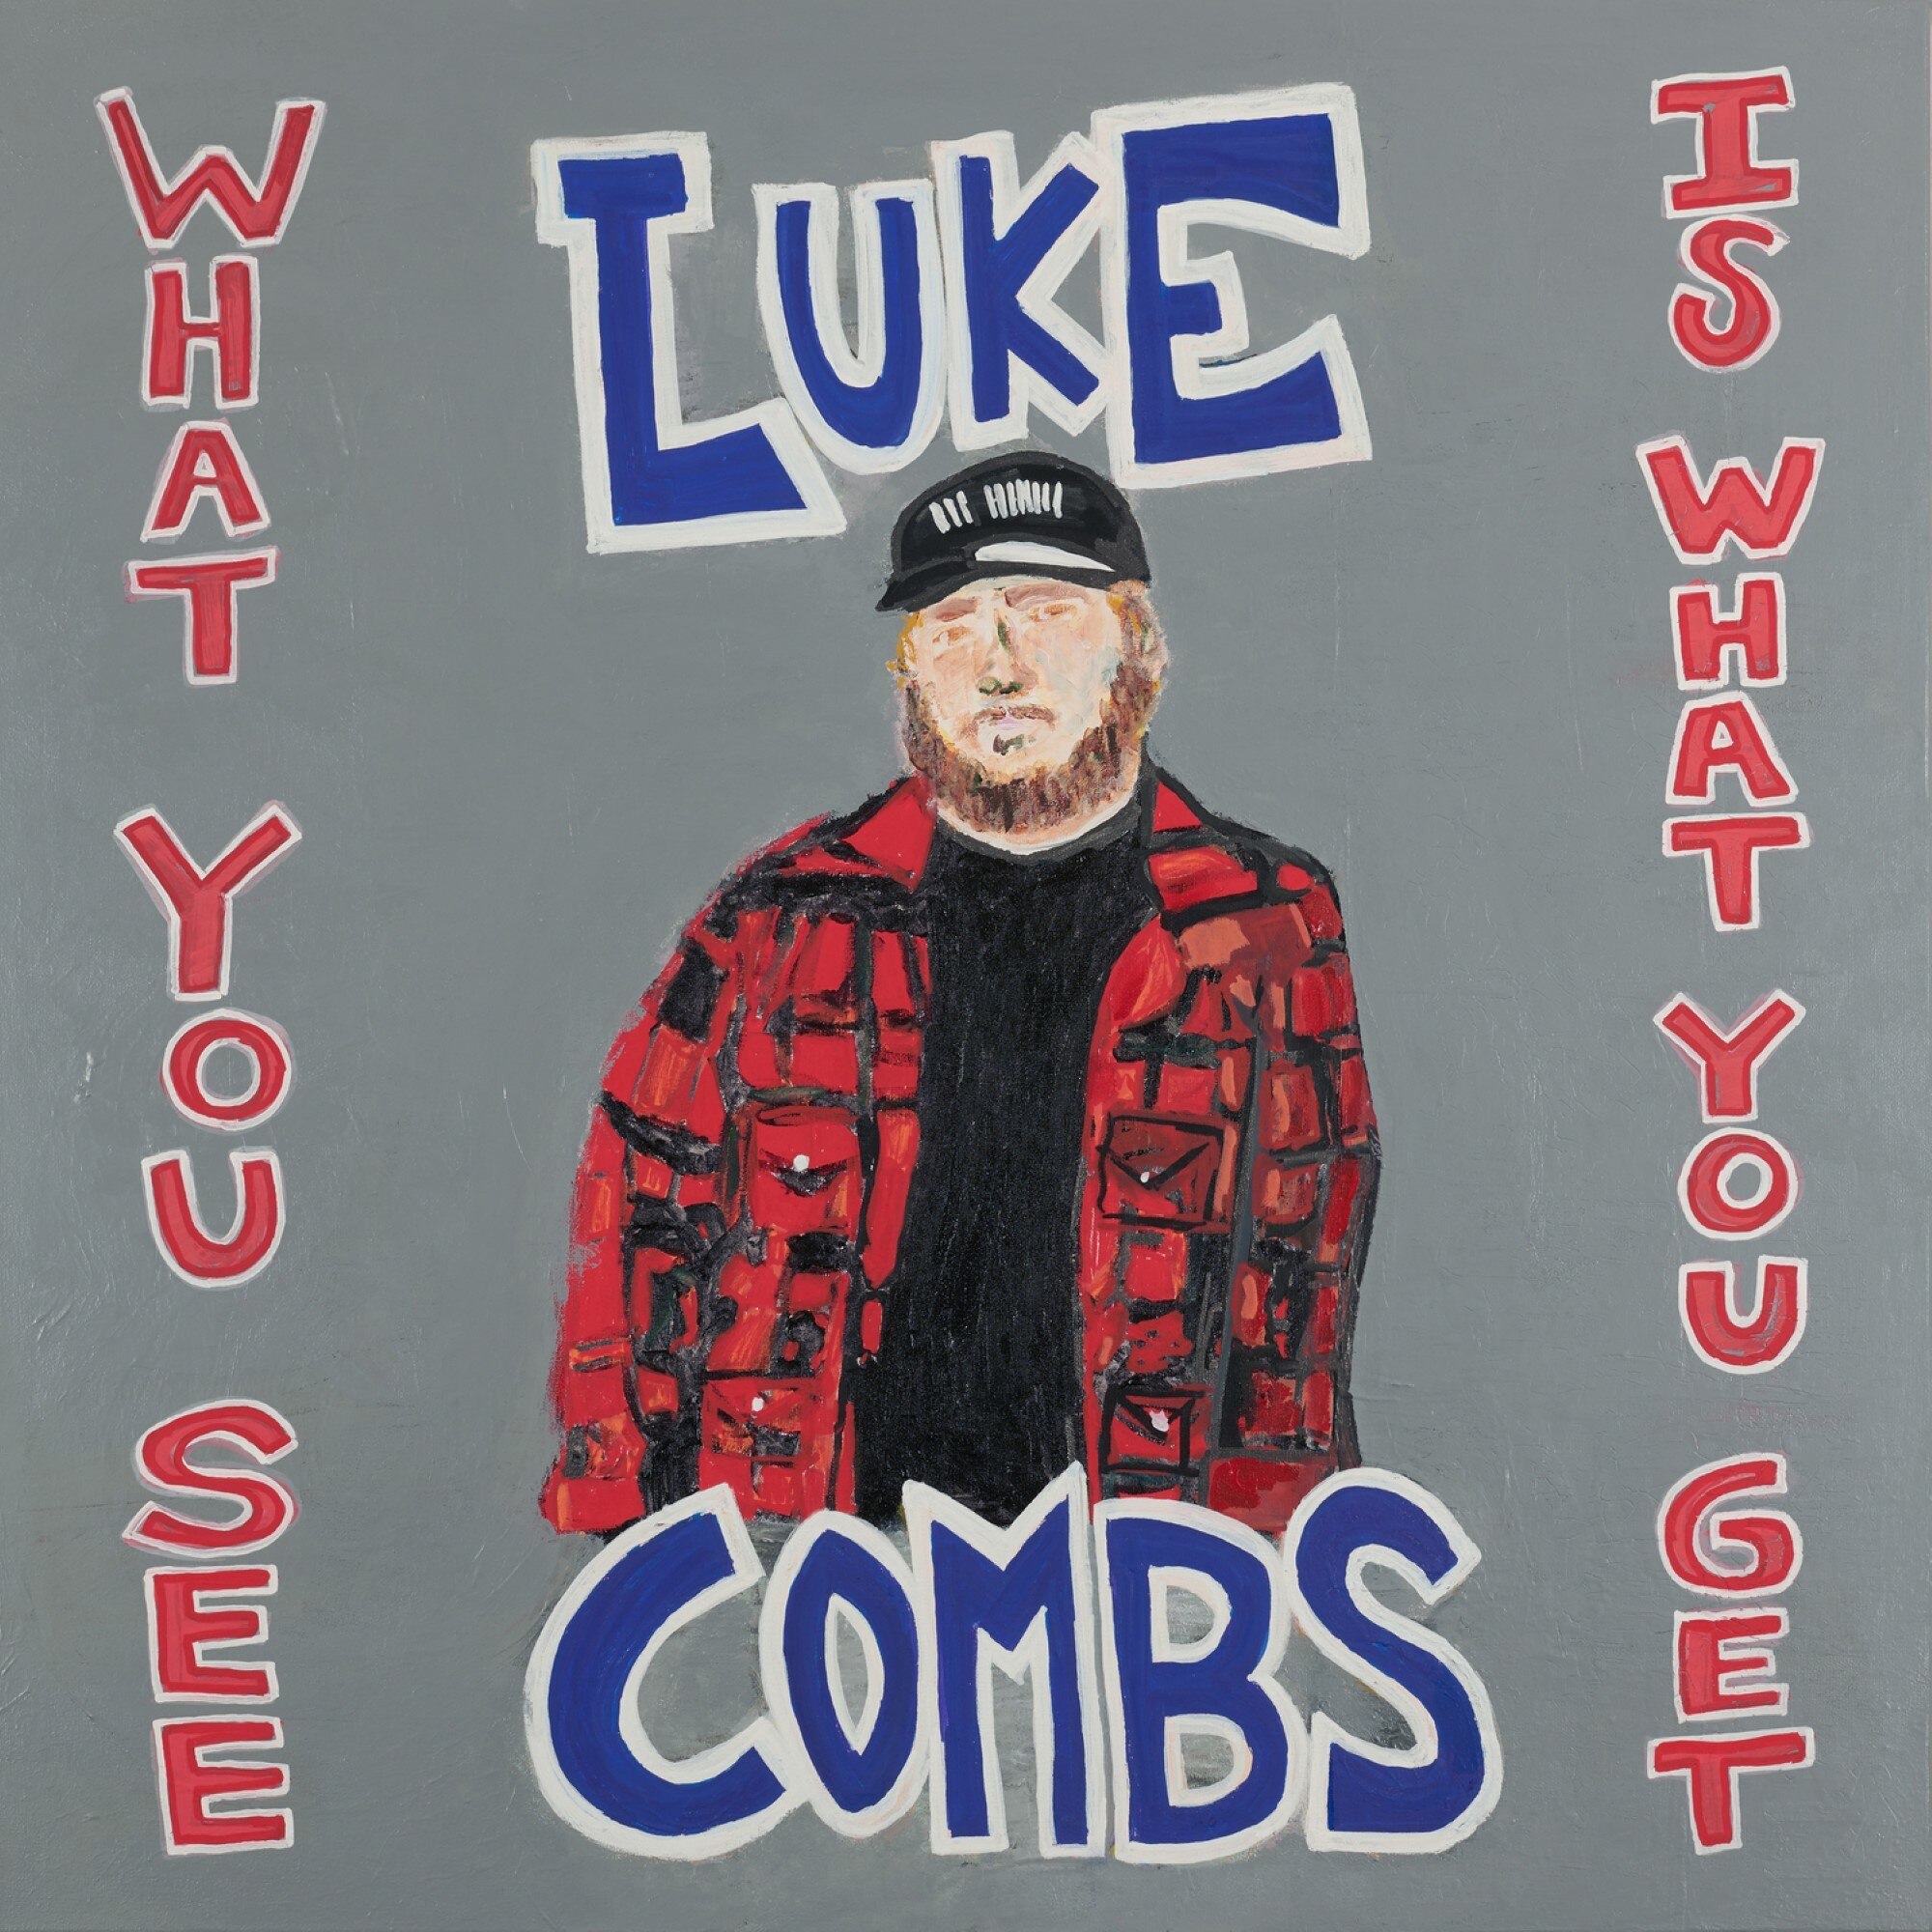 WHAT YOU SEE IS WHAT YOU GET -- COMBS  LUKE